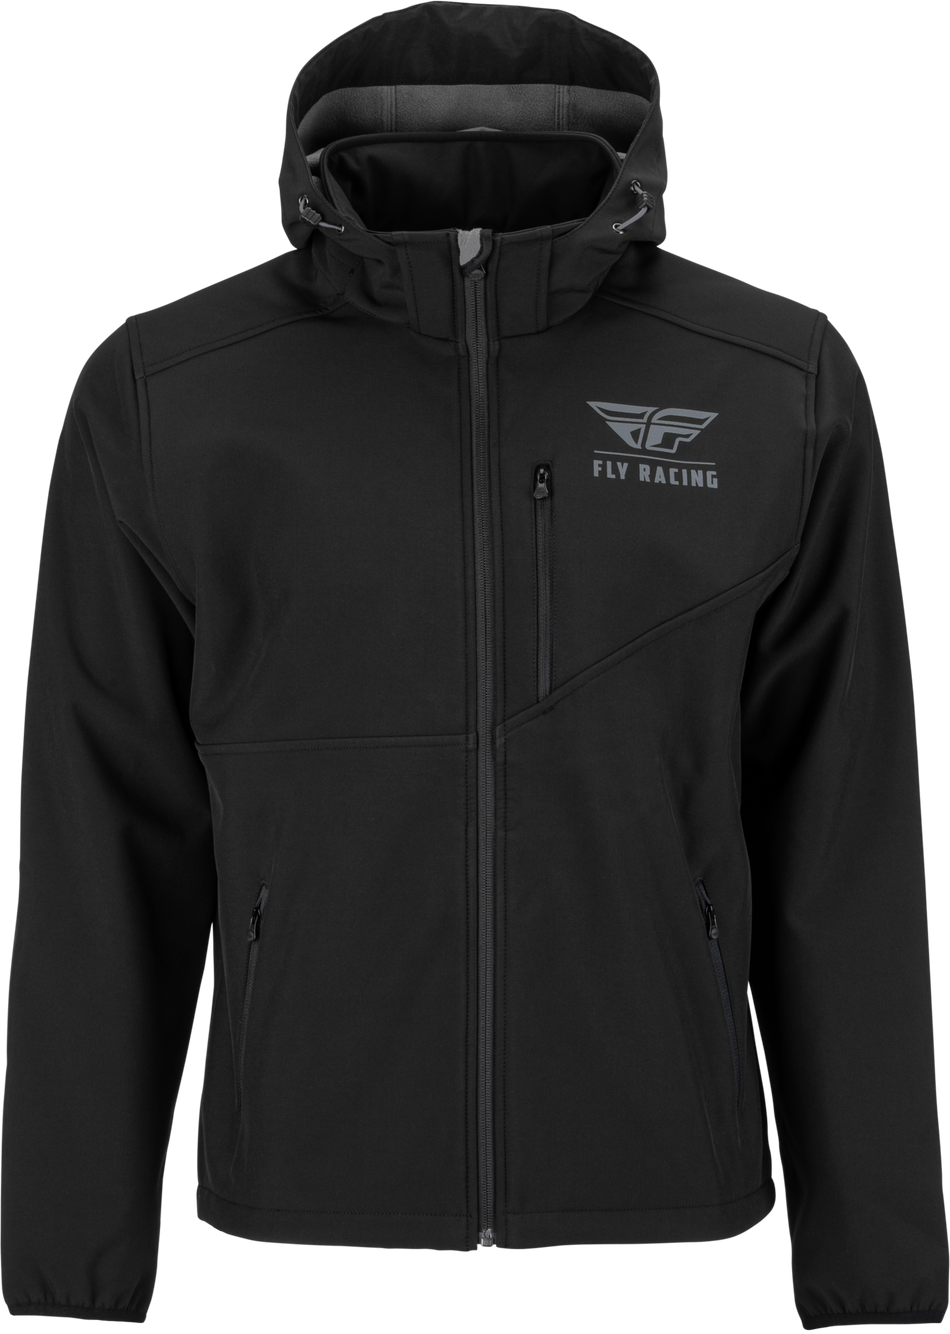 FLY RACING Checkpoint Jacket Black Sm 354-6383S